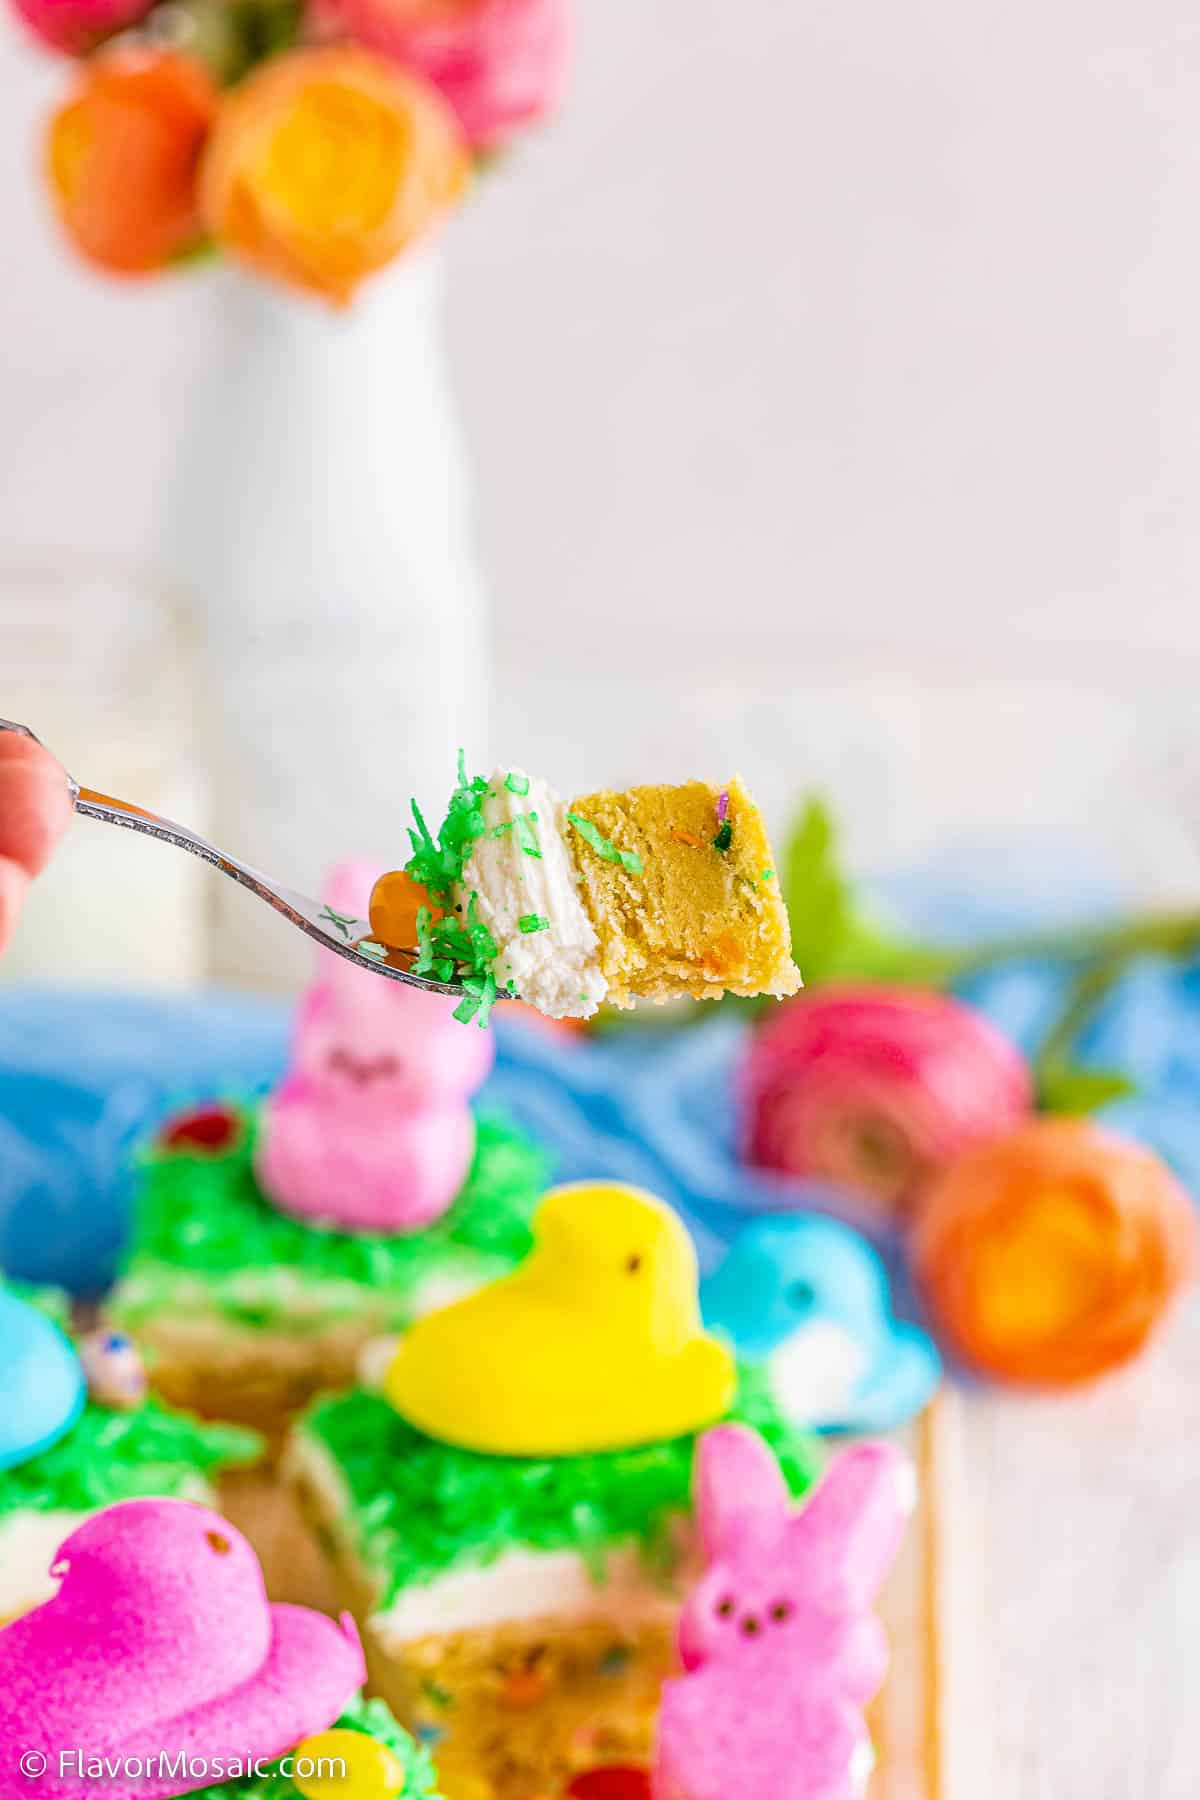 A bite of the Easter sugar cookie with cream cheese frosting, green coconut "grass", and an orange jelly bean sitting on a fork above the other Easter Sugar Cookie Bars with colorful Easter Peeps in the background.